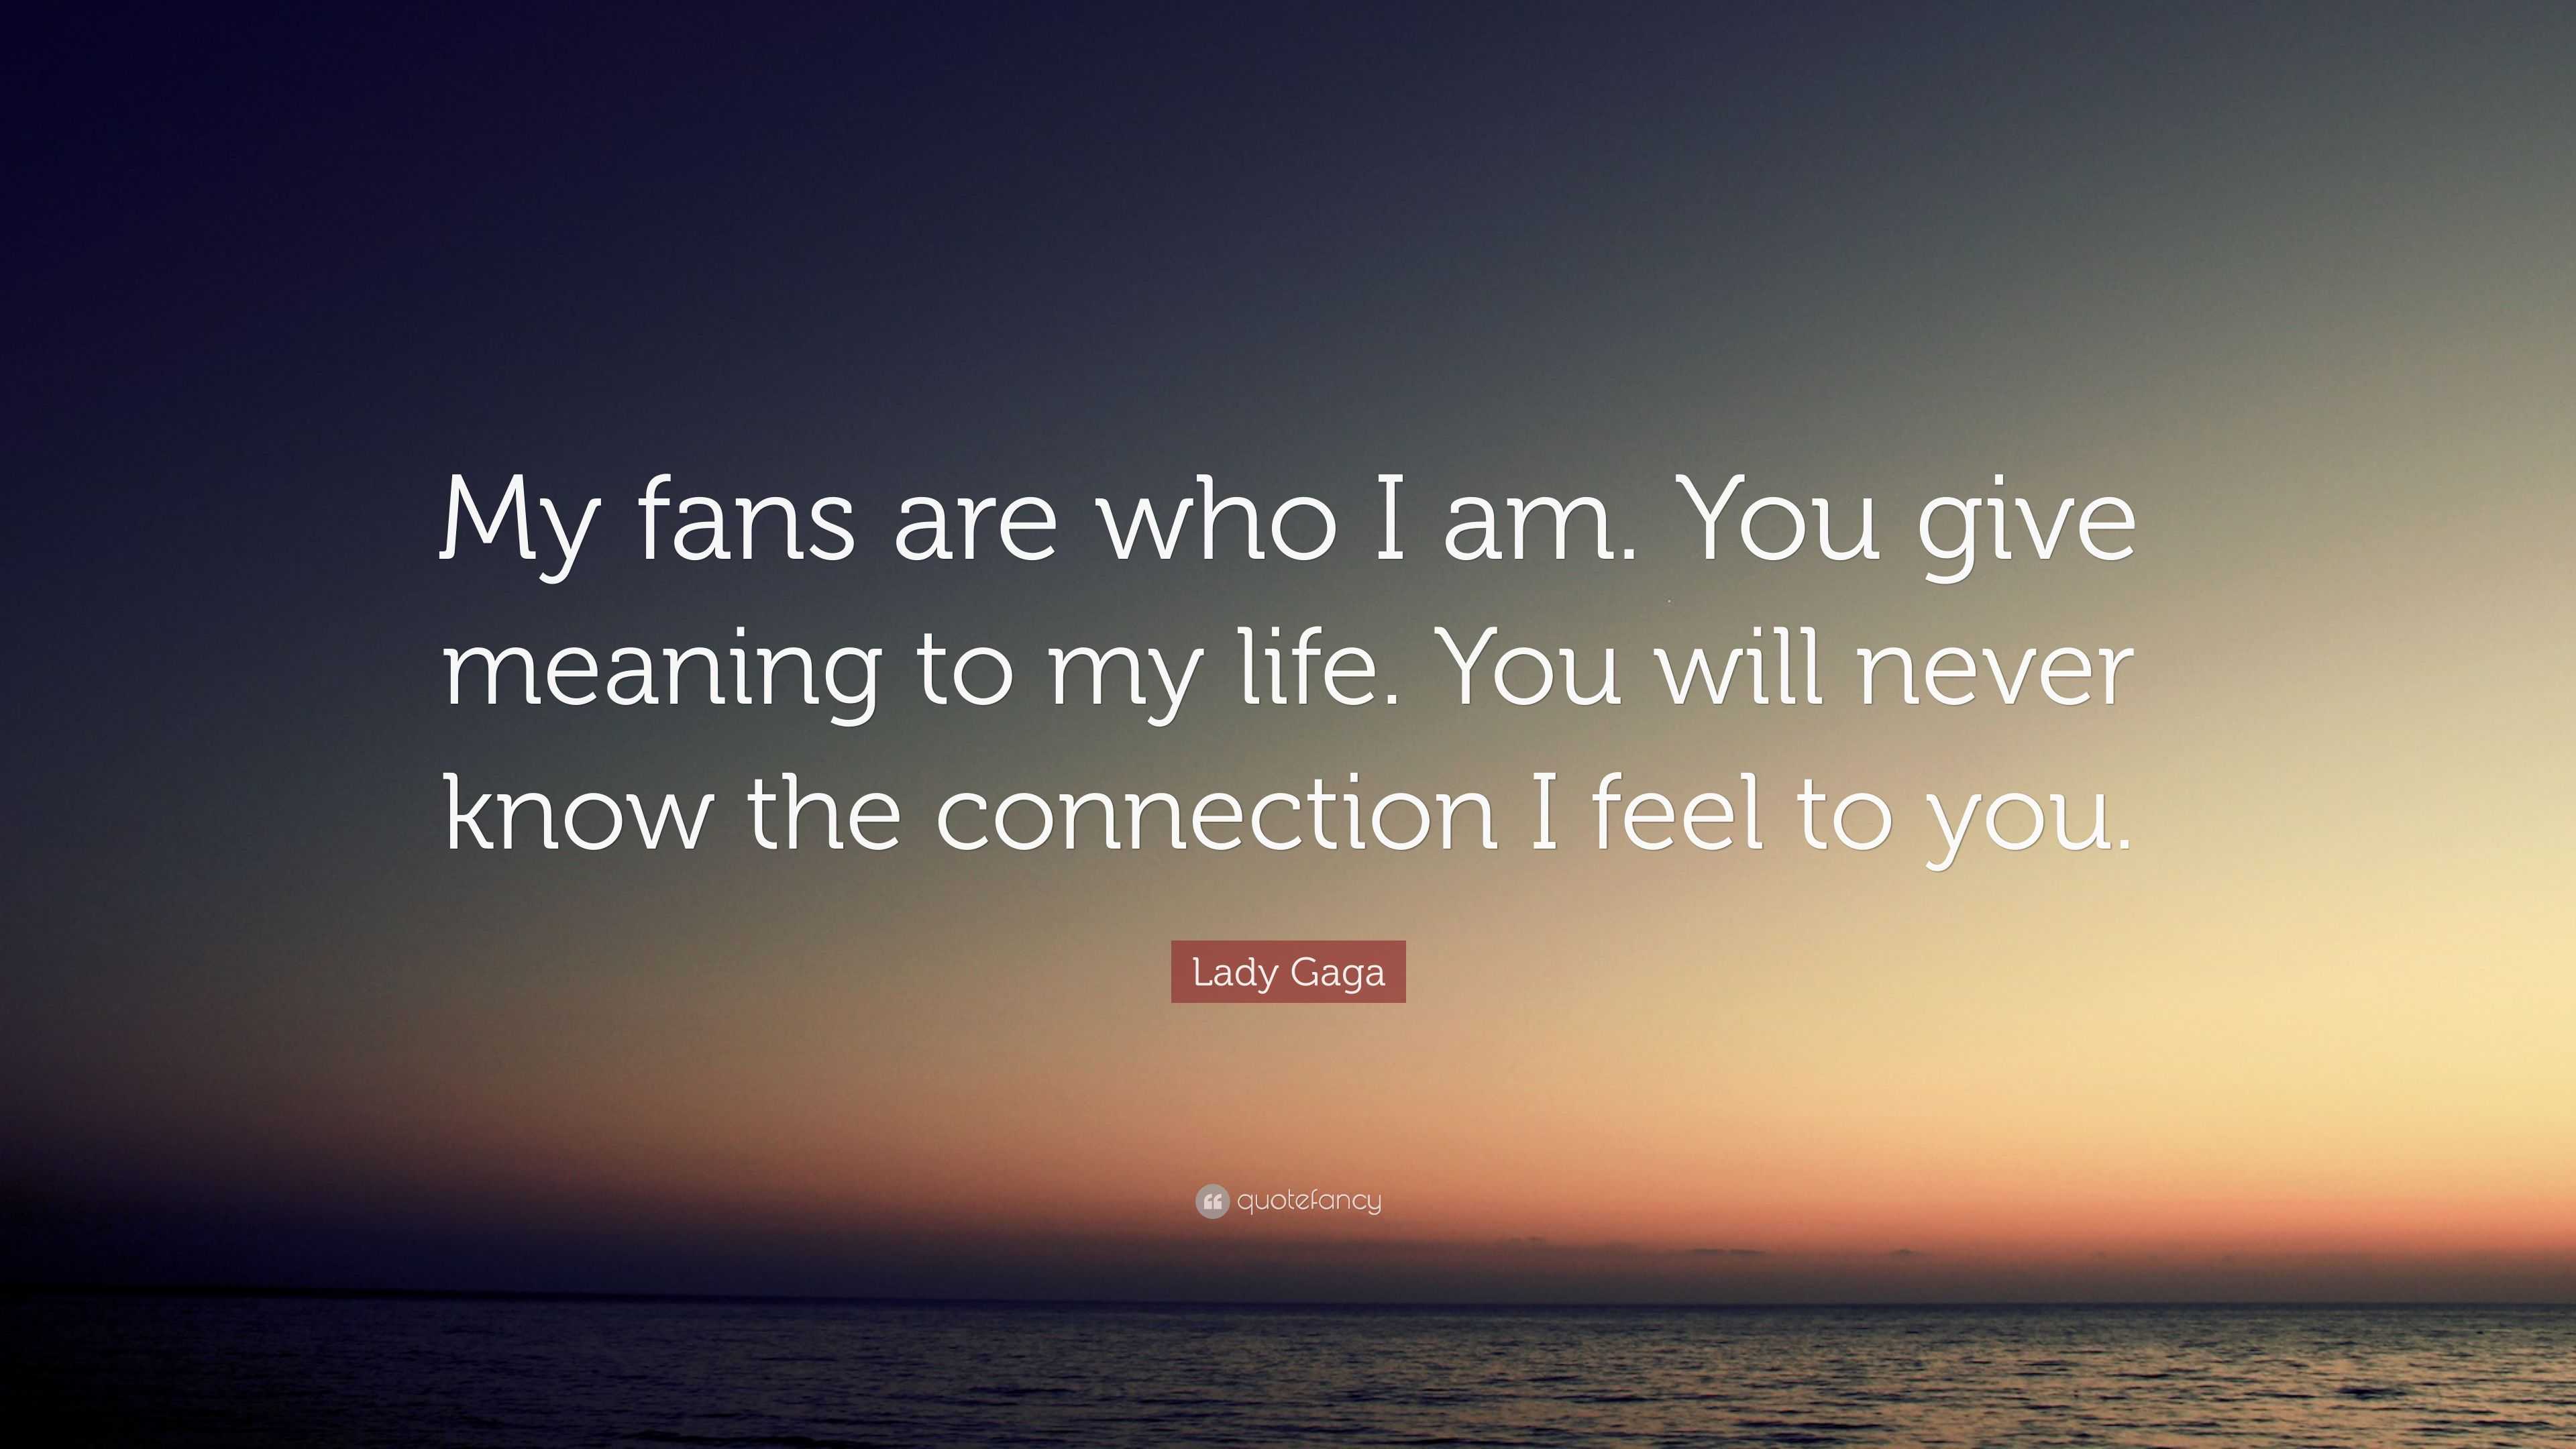 Lady Gaga Quote “My fans are who I am You give meaning to